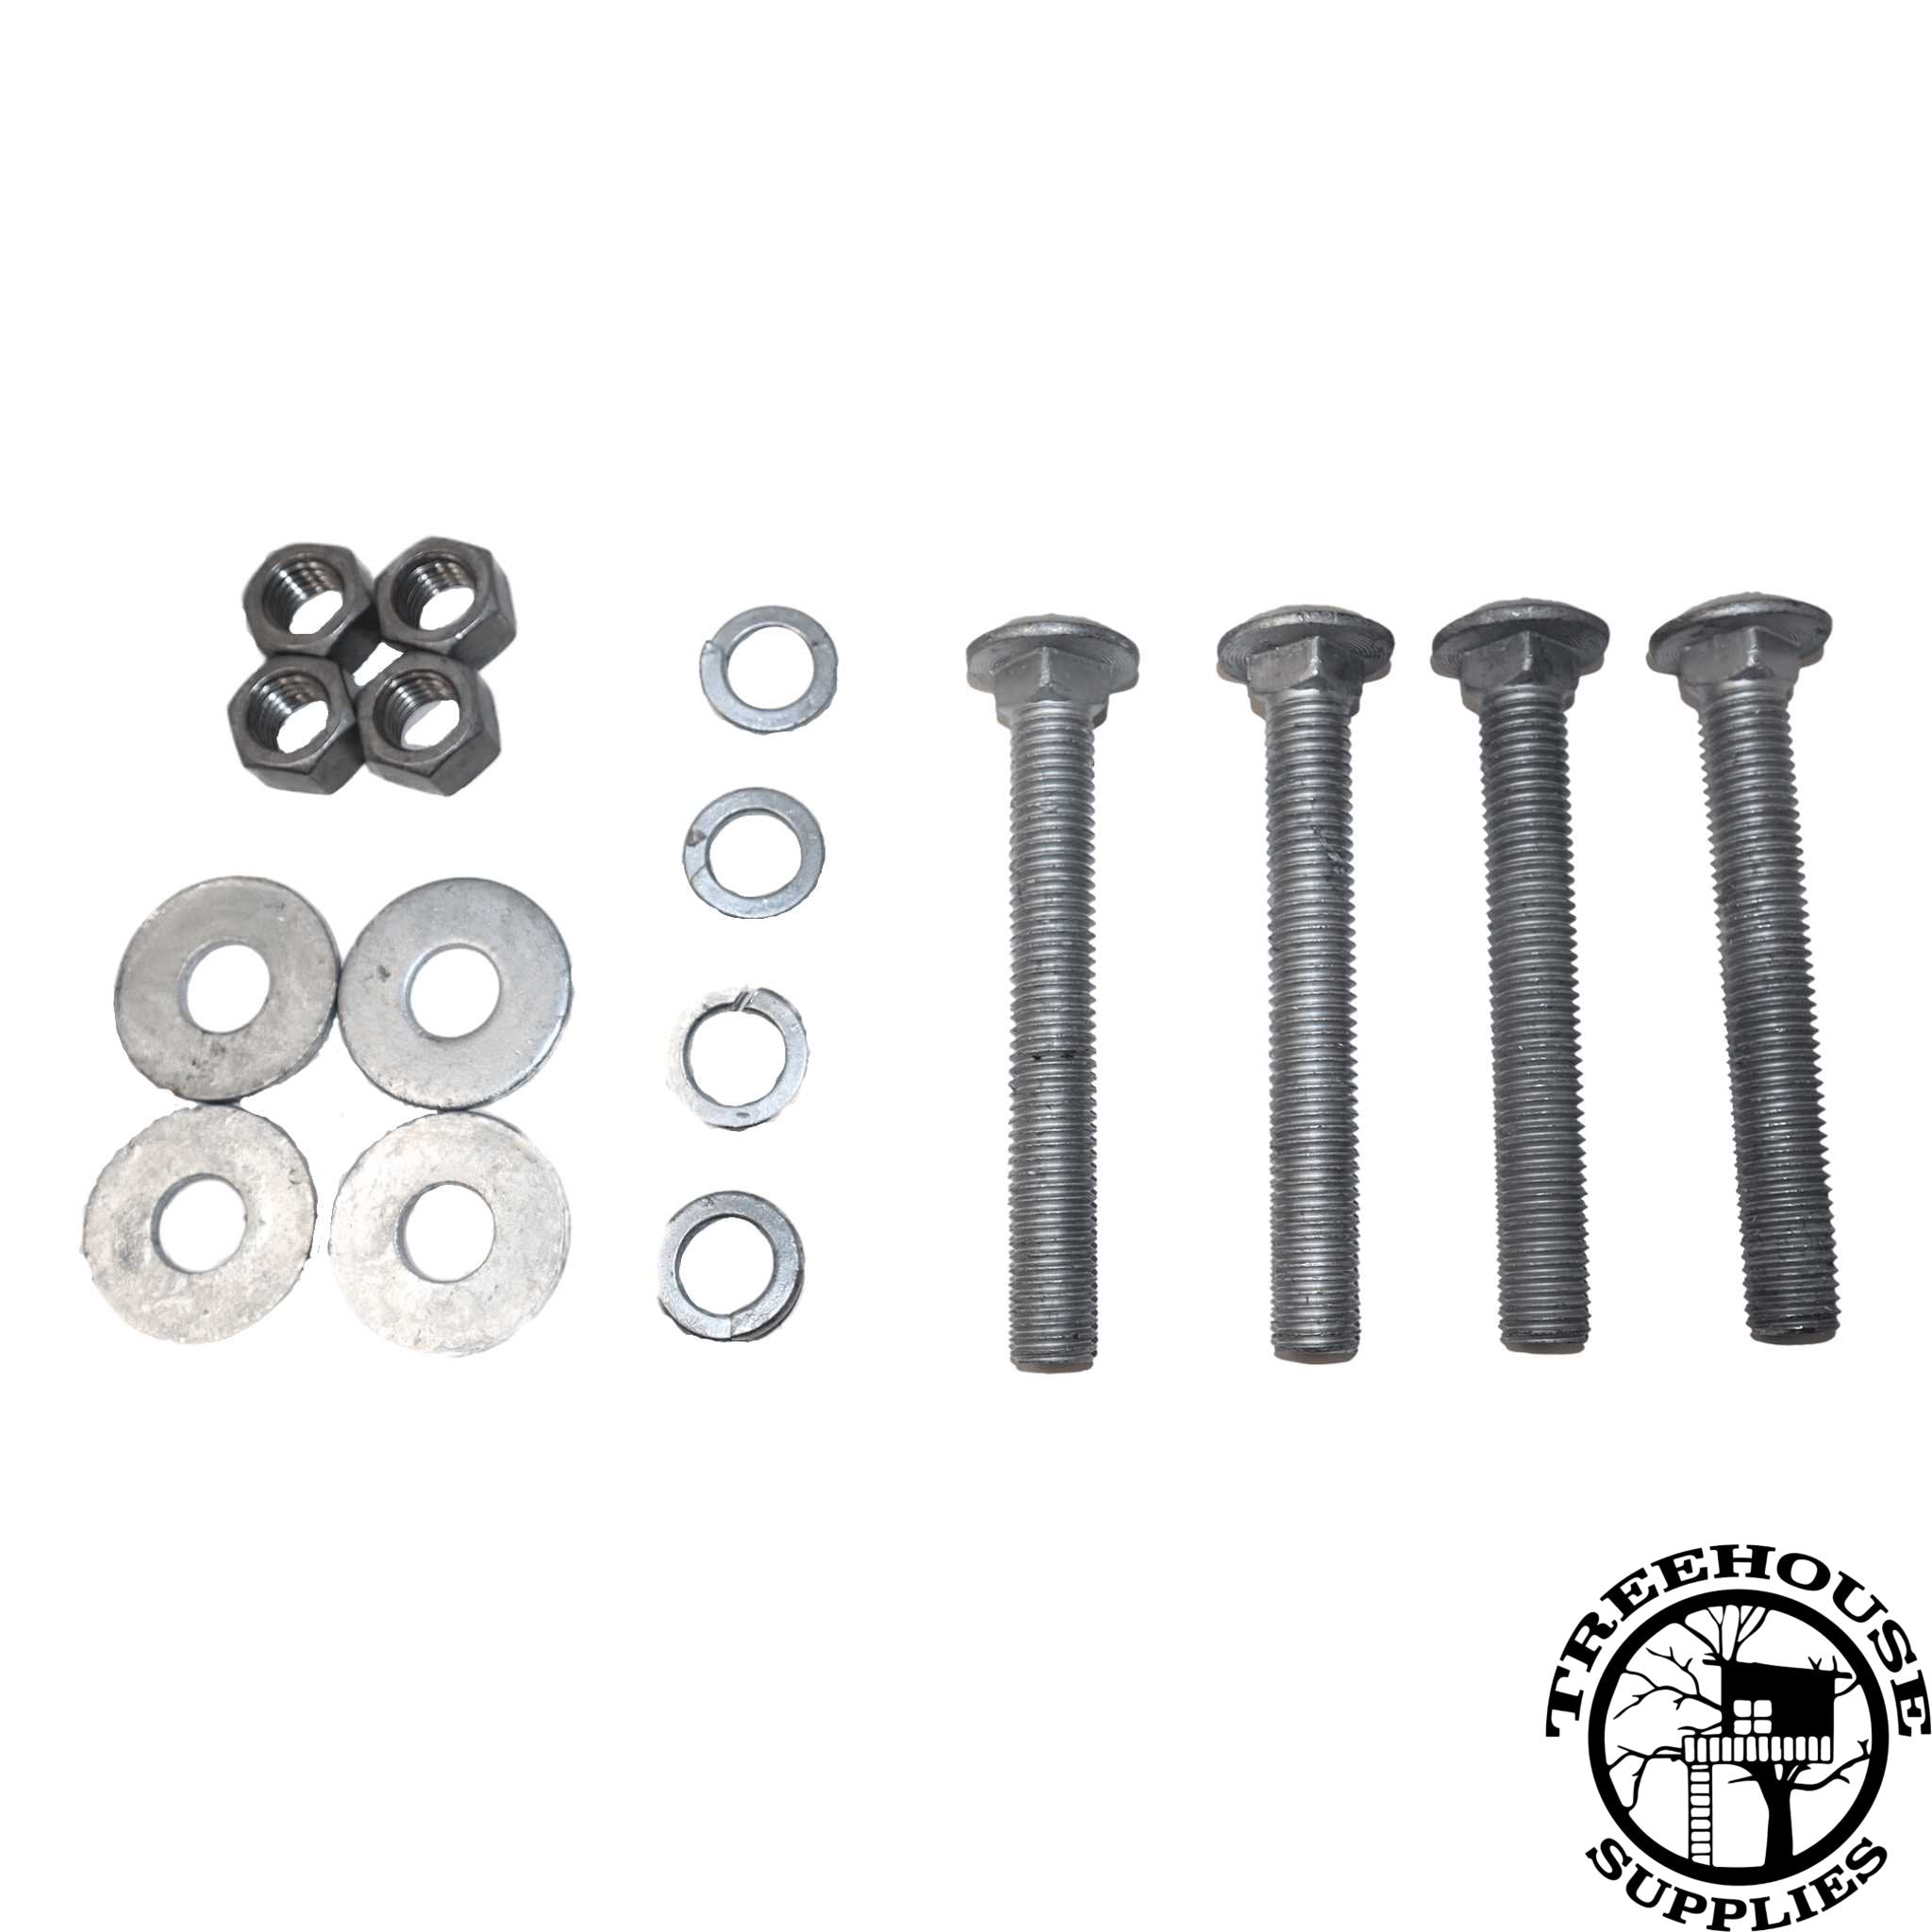 Photo of the hardware contents of 2 packs of 5/8"_CARRIAGE BOLT KITS. Nuts, washers, and bolts shown. White Background.